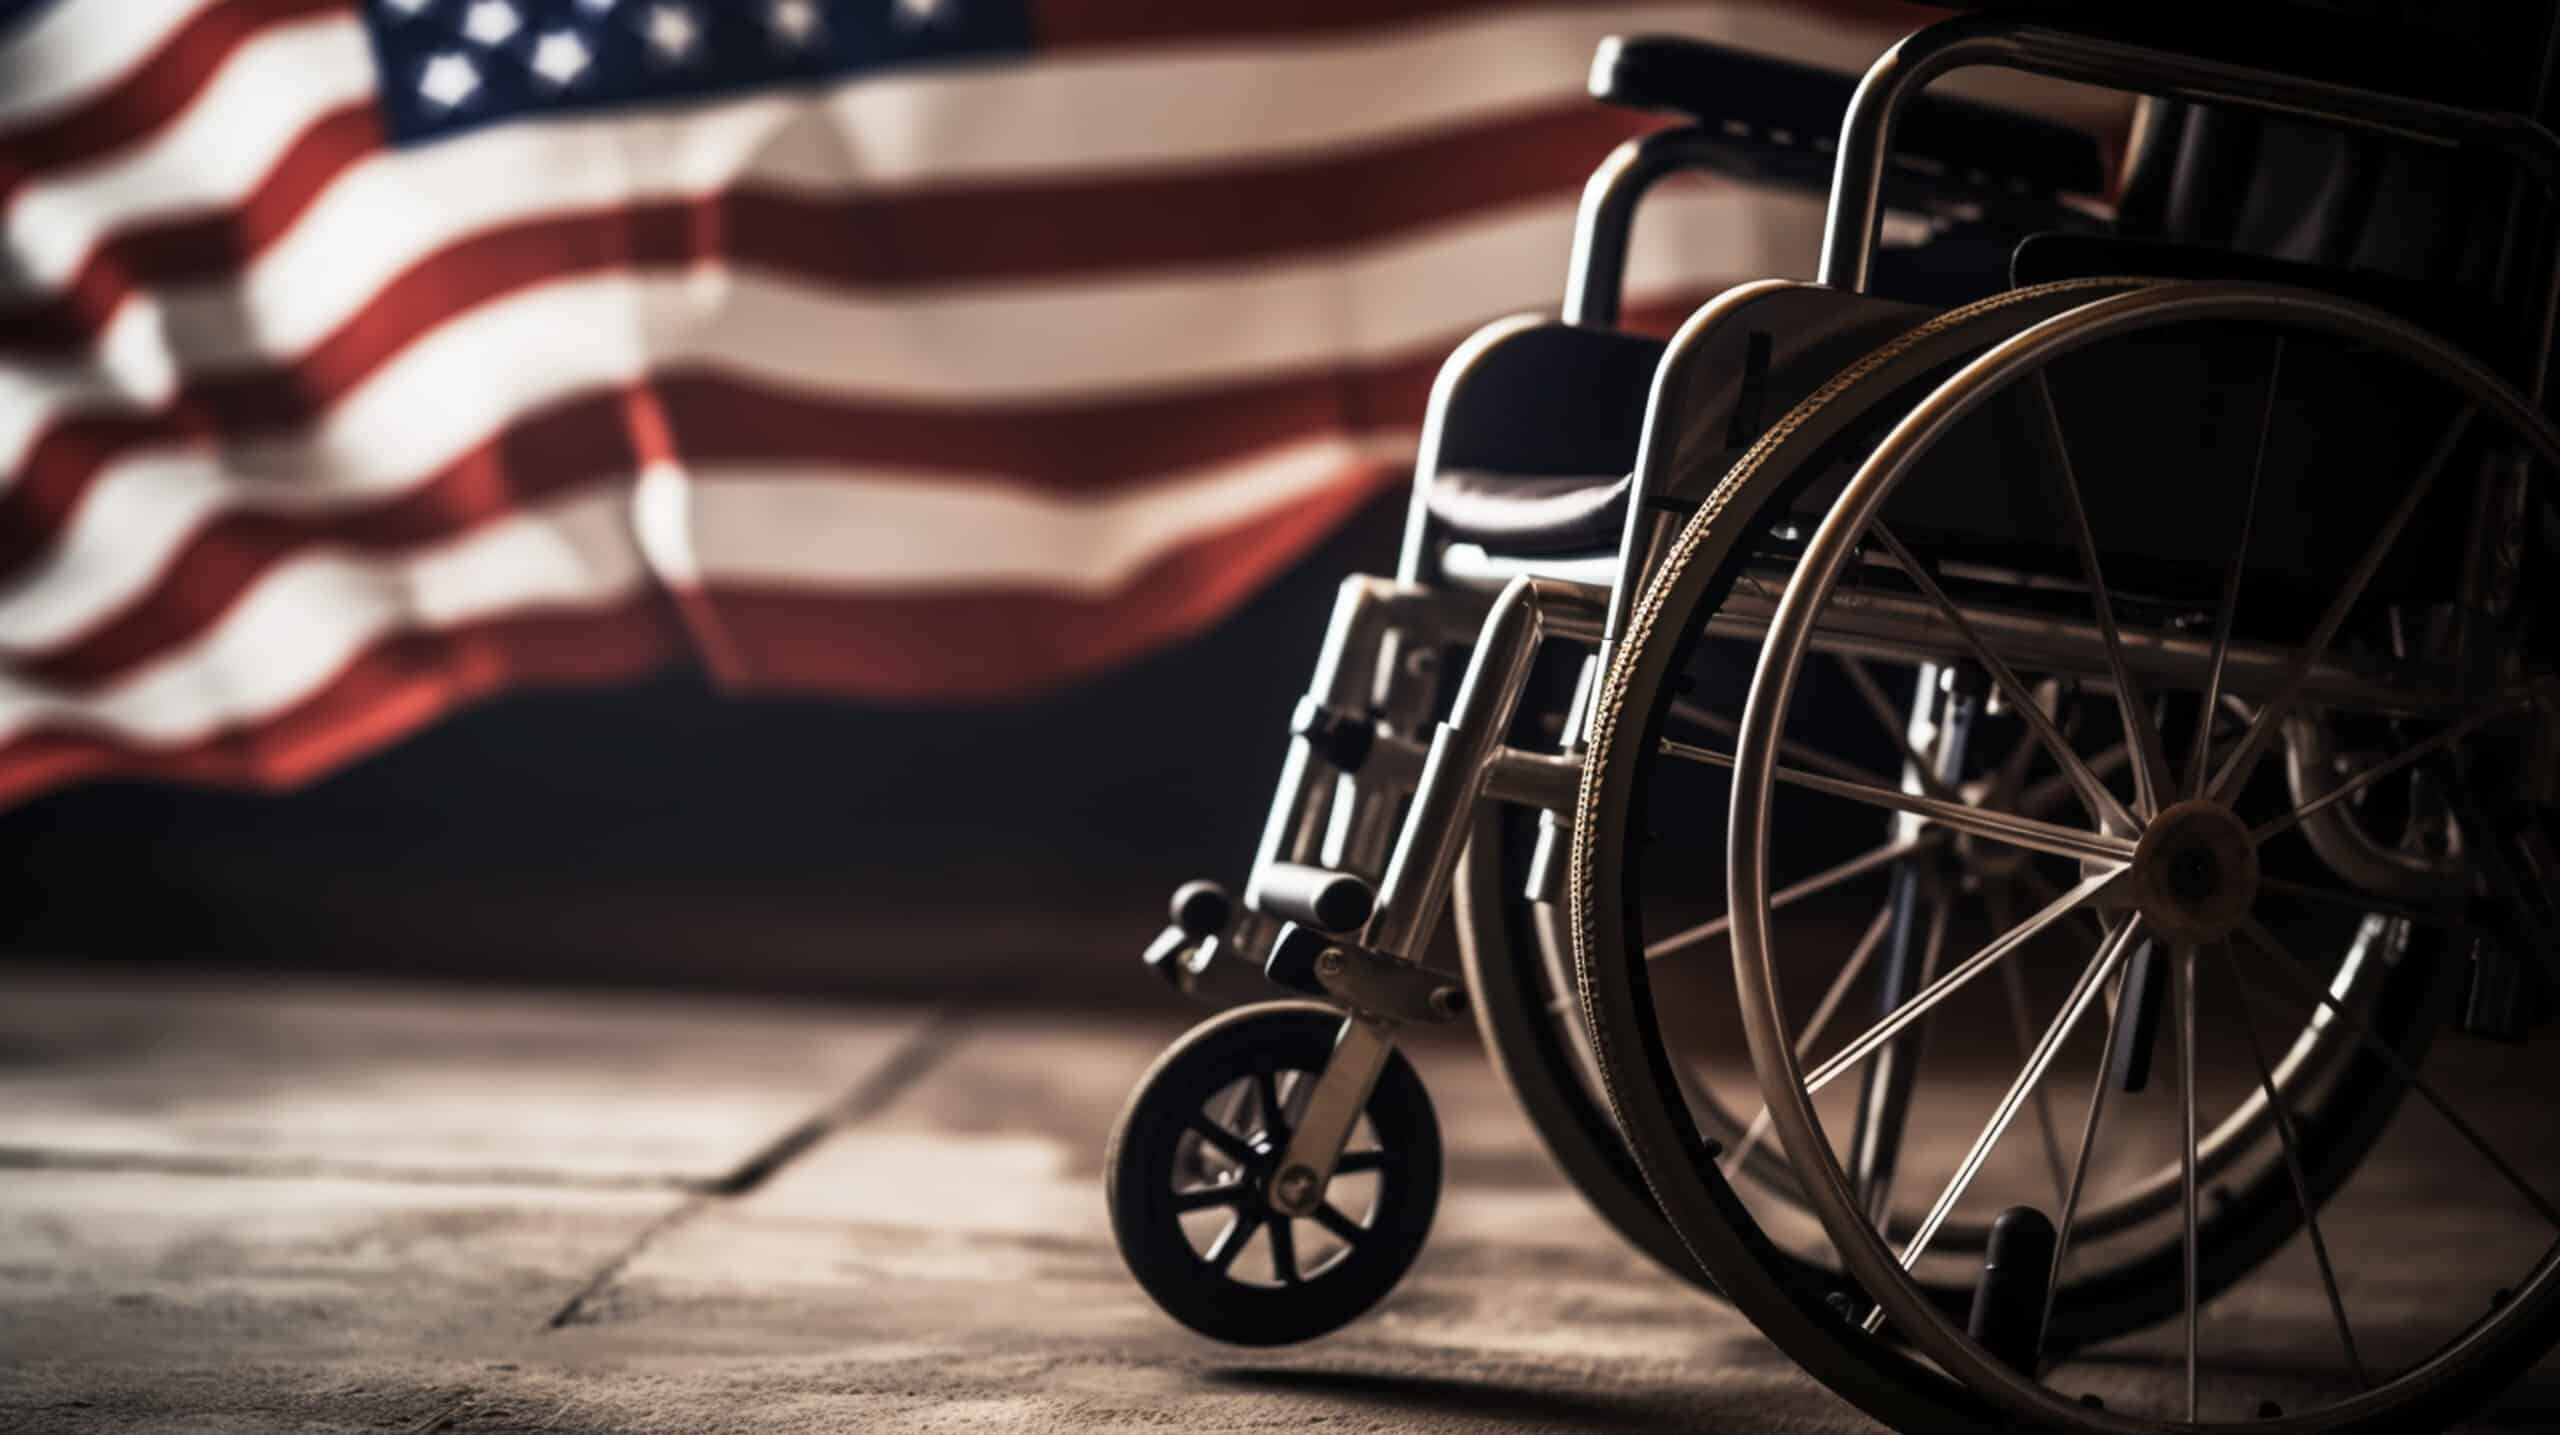 The Guide to Handicap Veterans in Texas